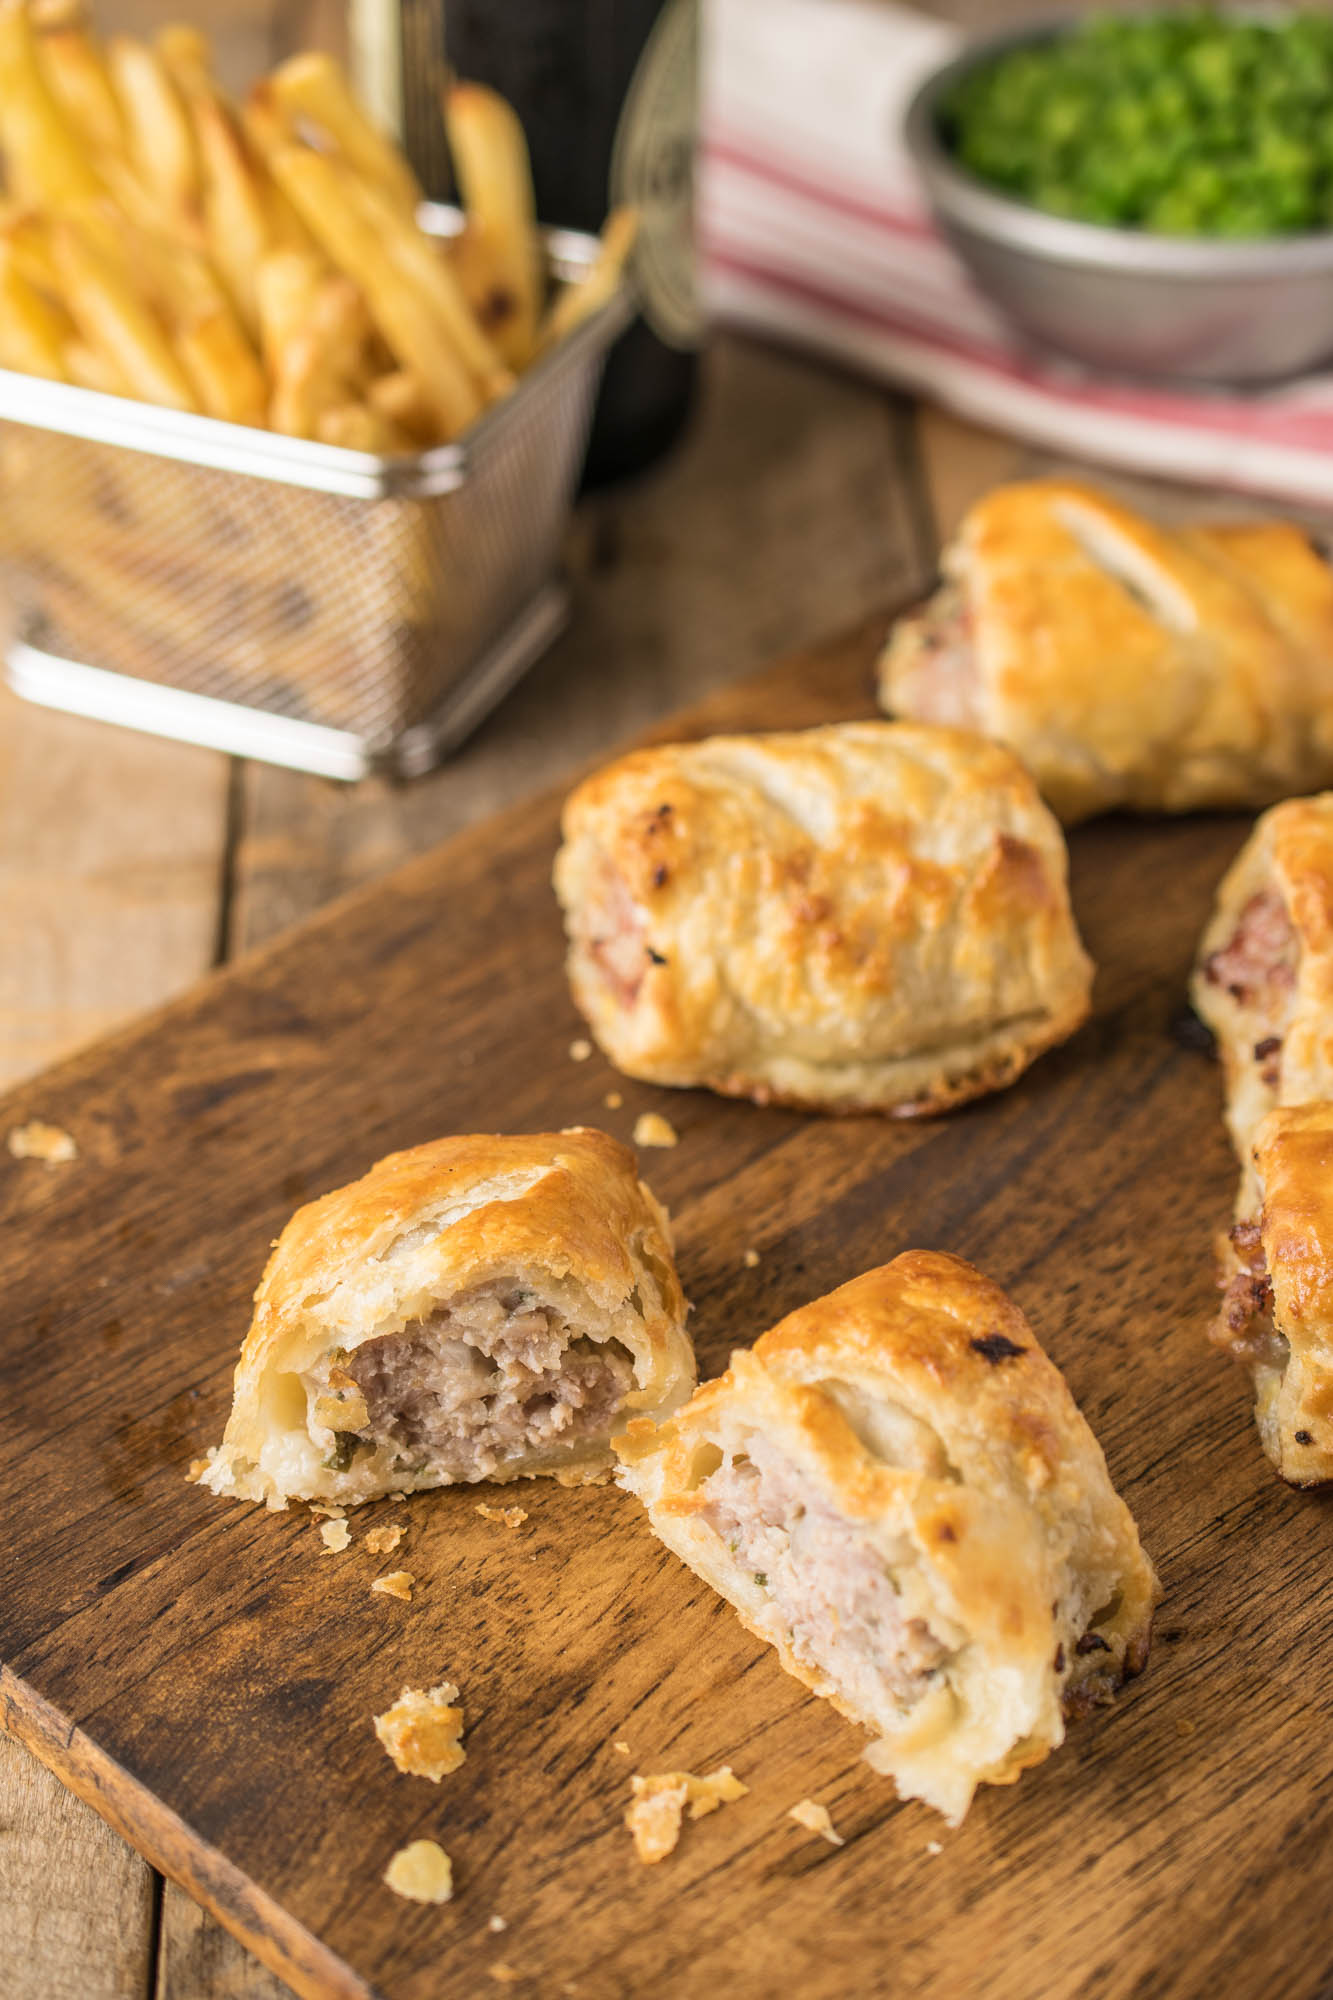 Sausage rolls. Flaky pastry surrounds a delicious pork and sage filling.